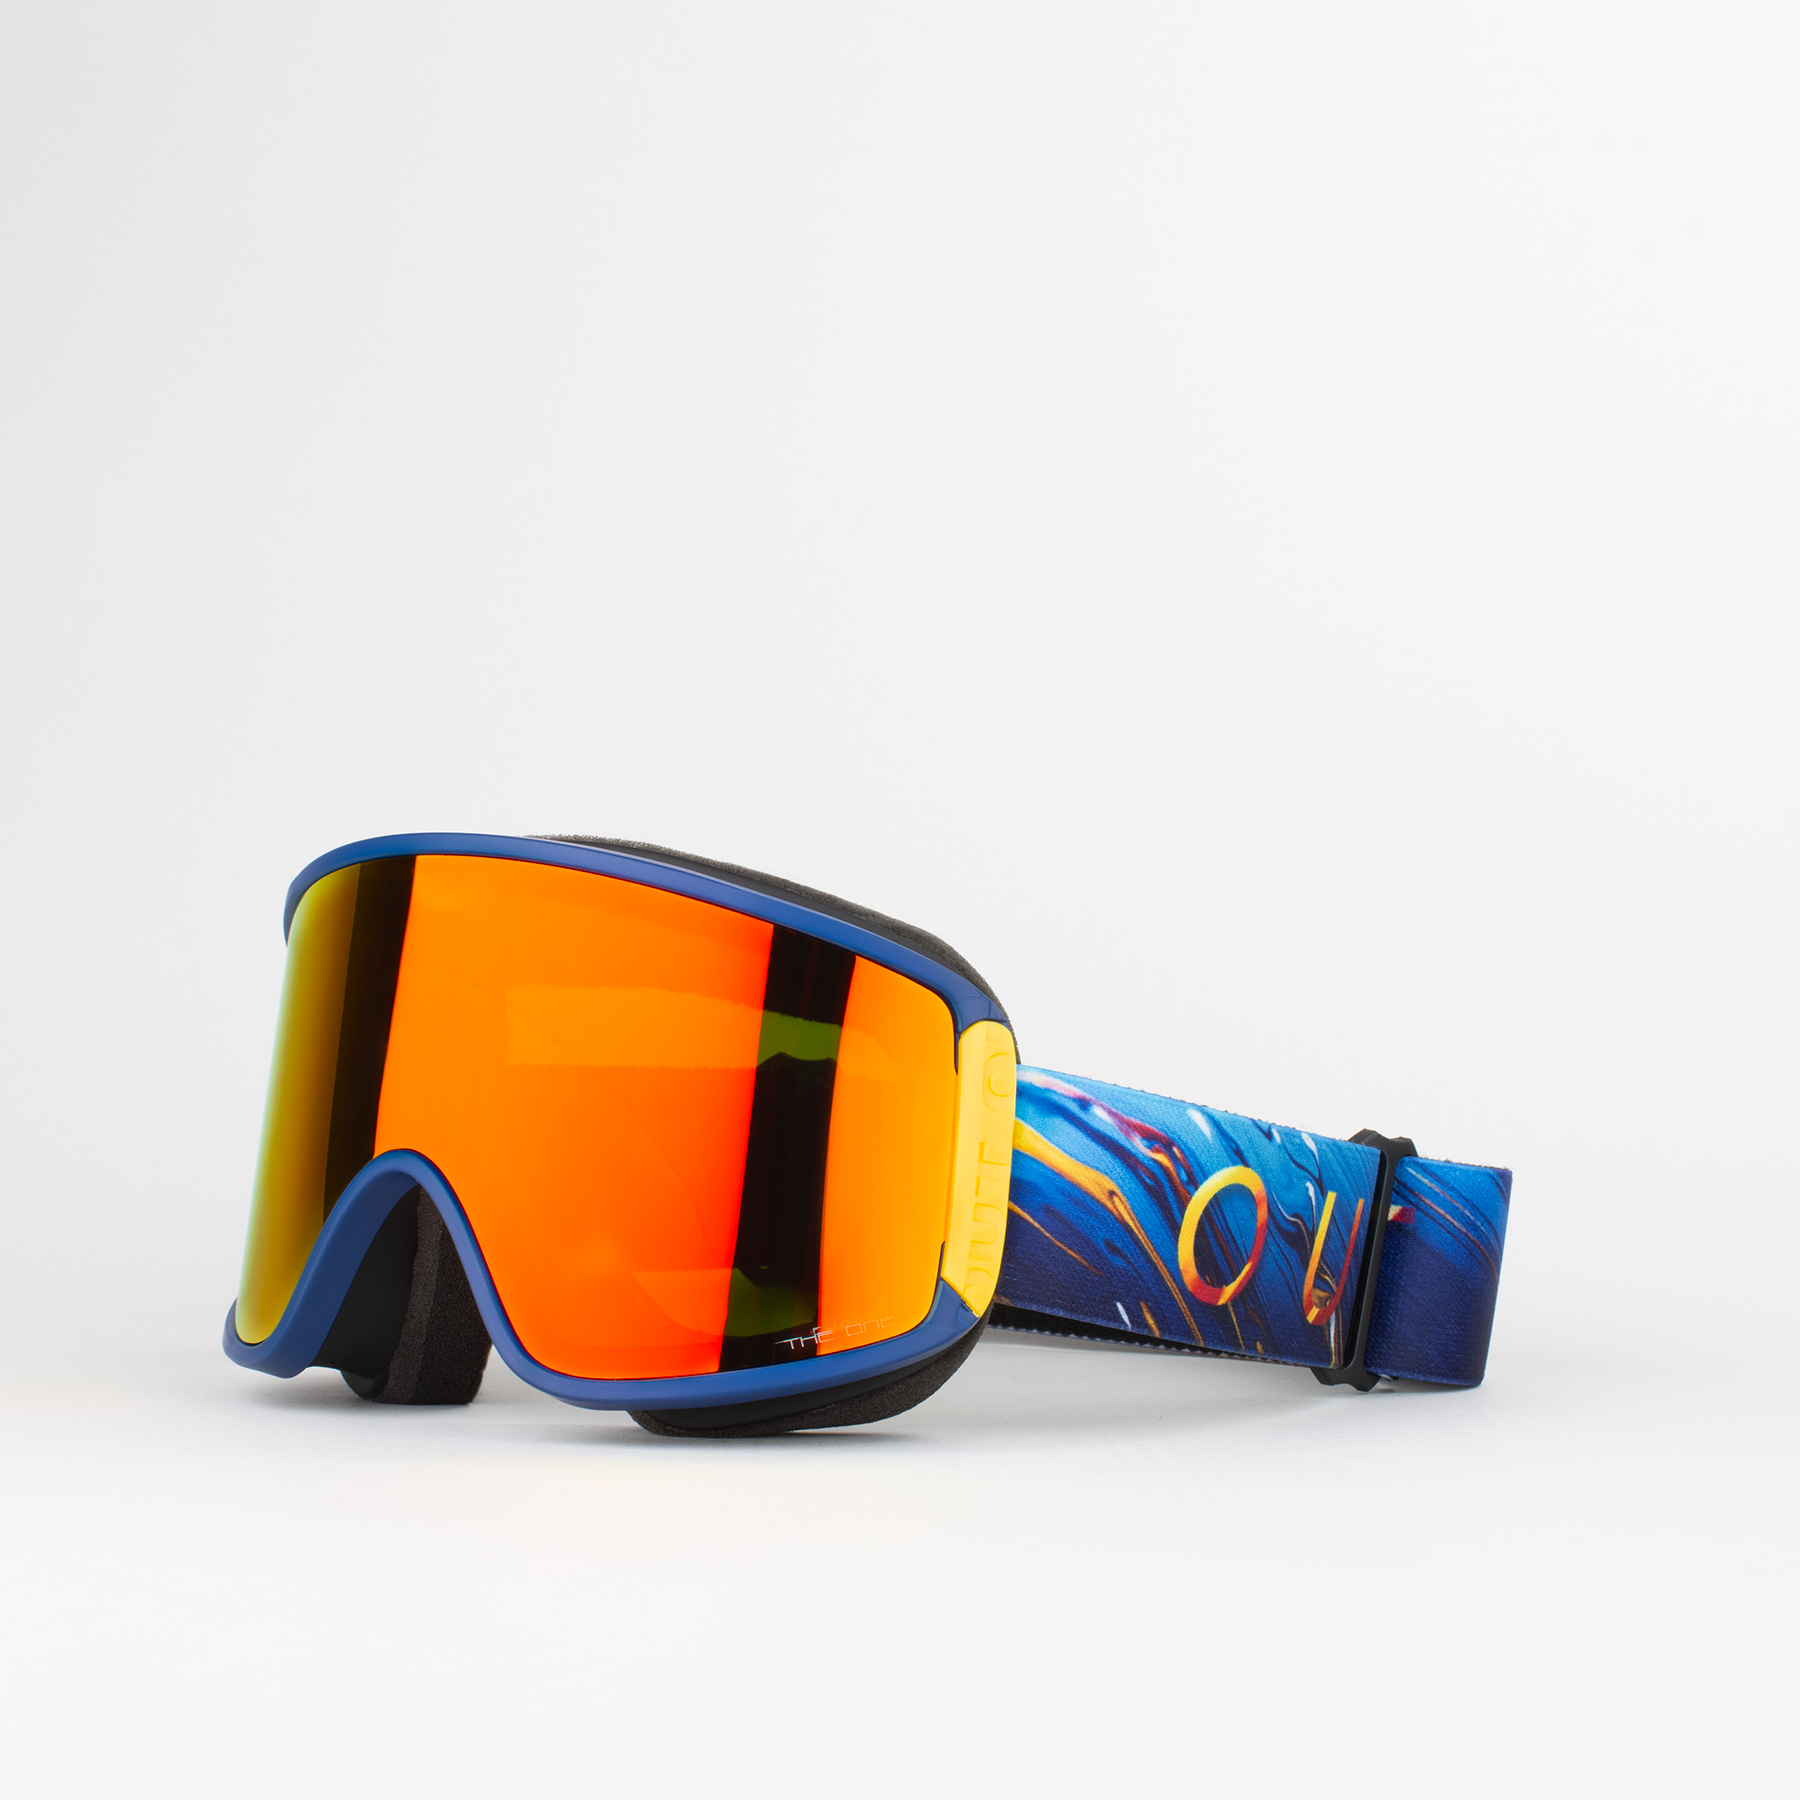 Shift Atmosphere snow goggle with The One Fuoco lens